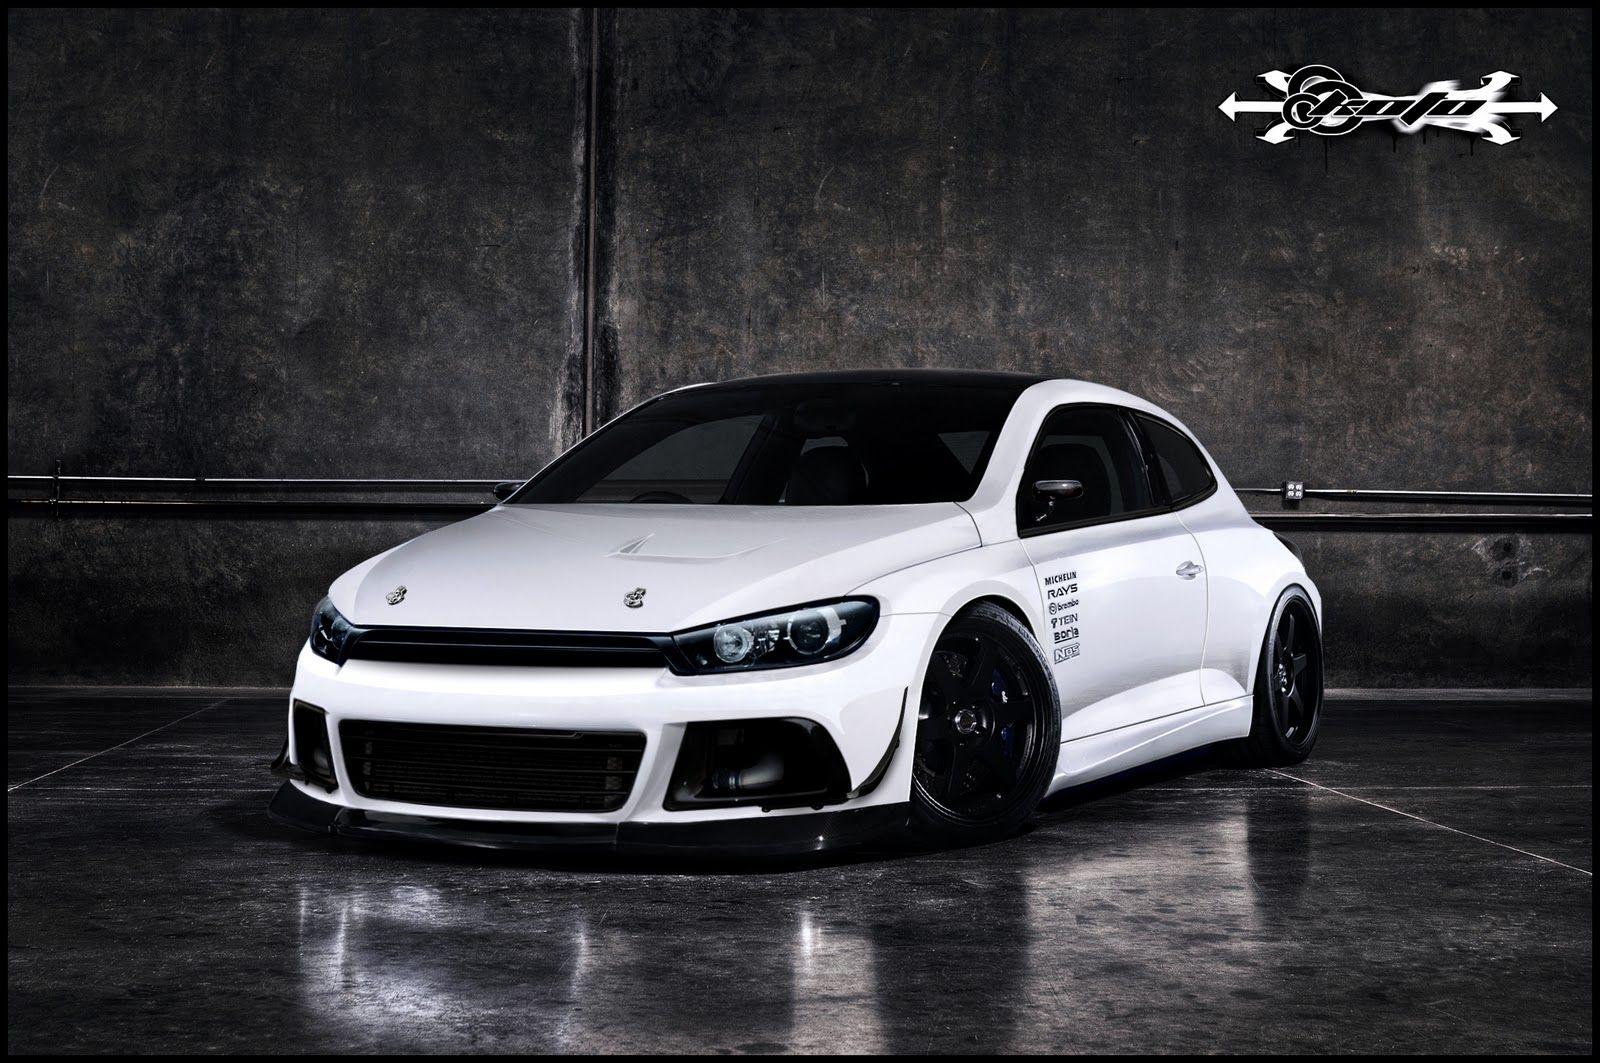 Volkswagen Scirocco Wallpaper HD Photo, Wallpaper and other Image